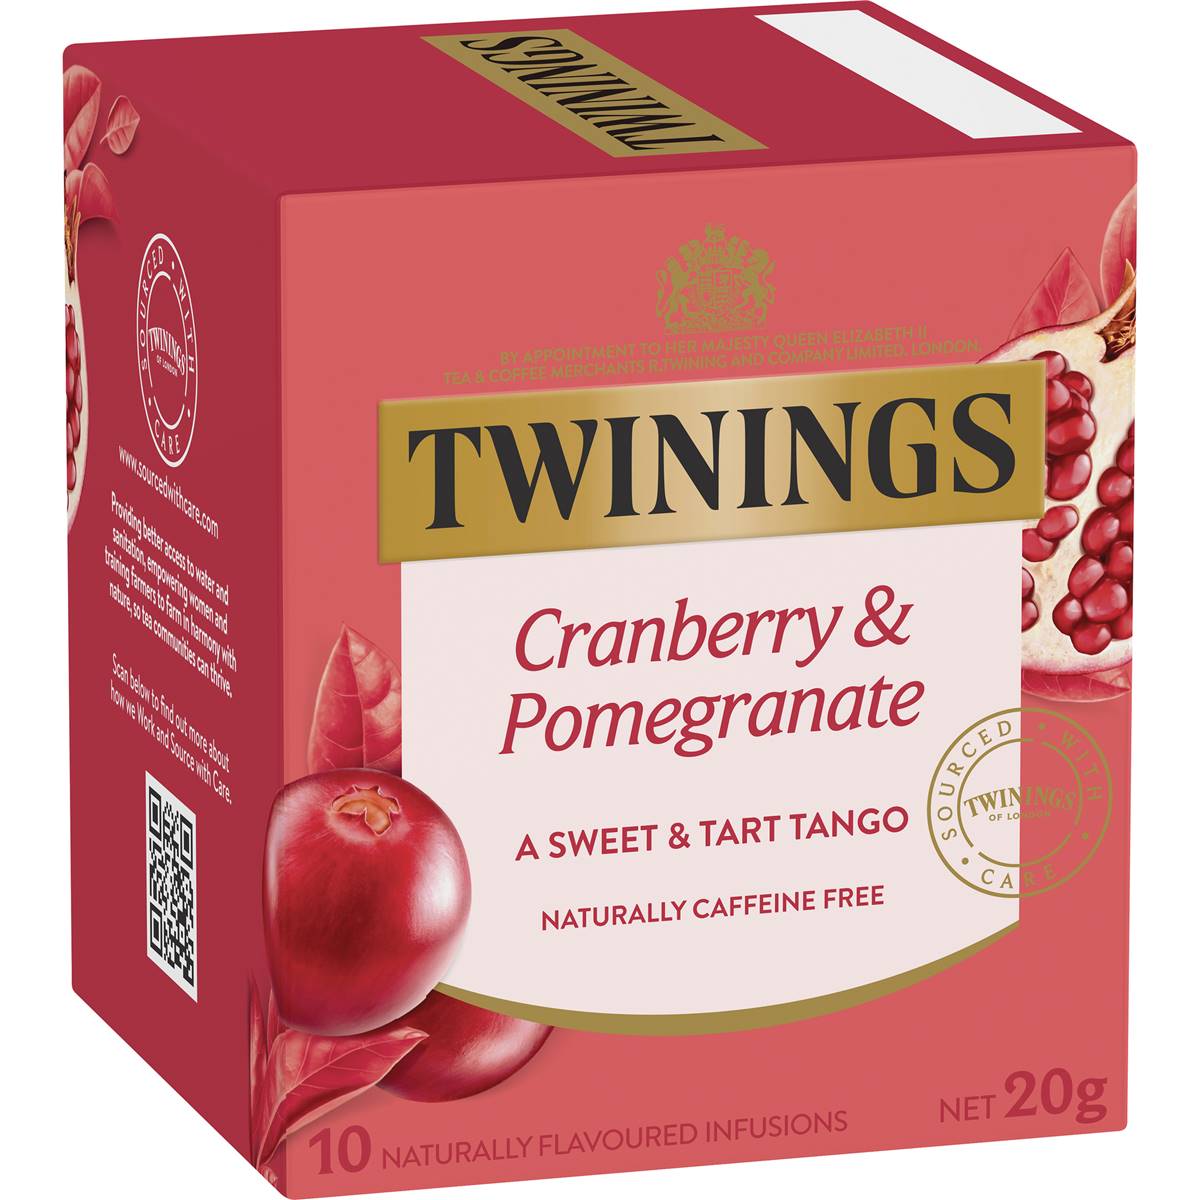 Calories in Twinings Cranberry & Pomegranate Tea Bags